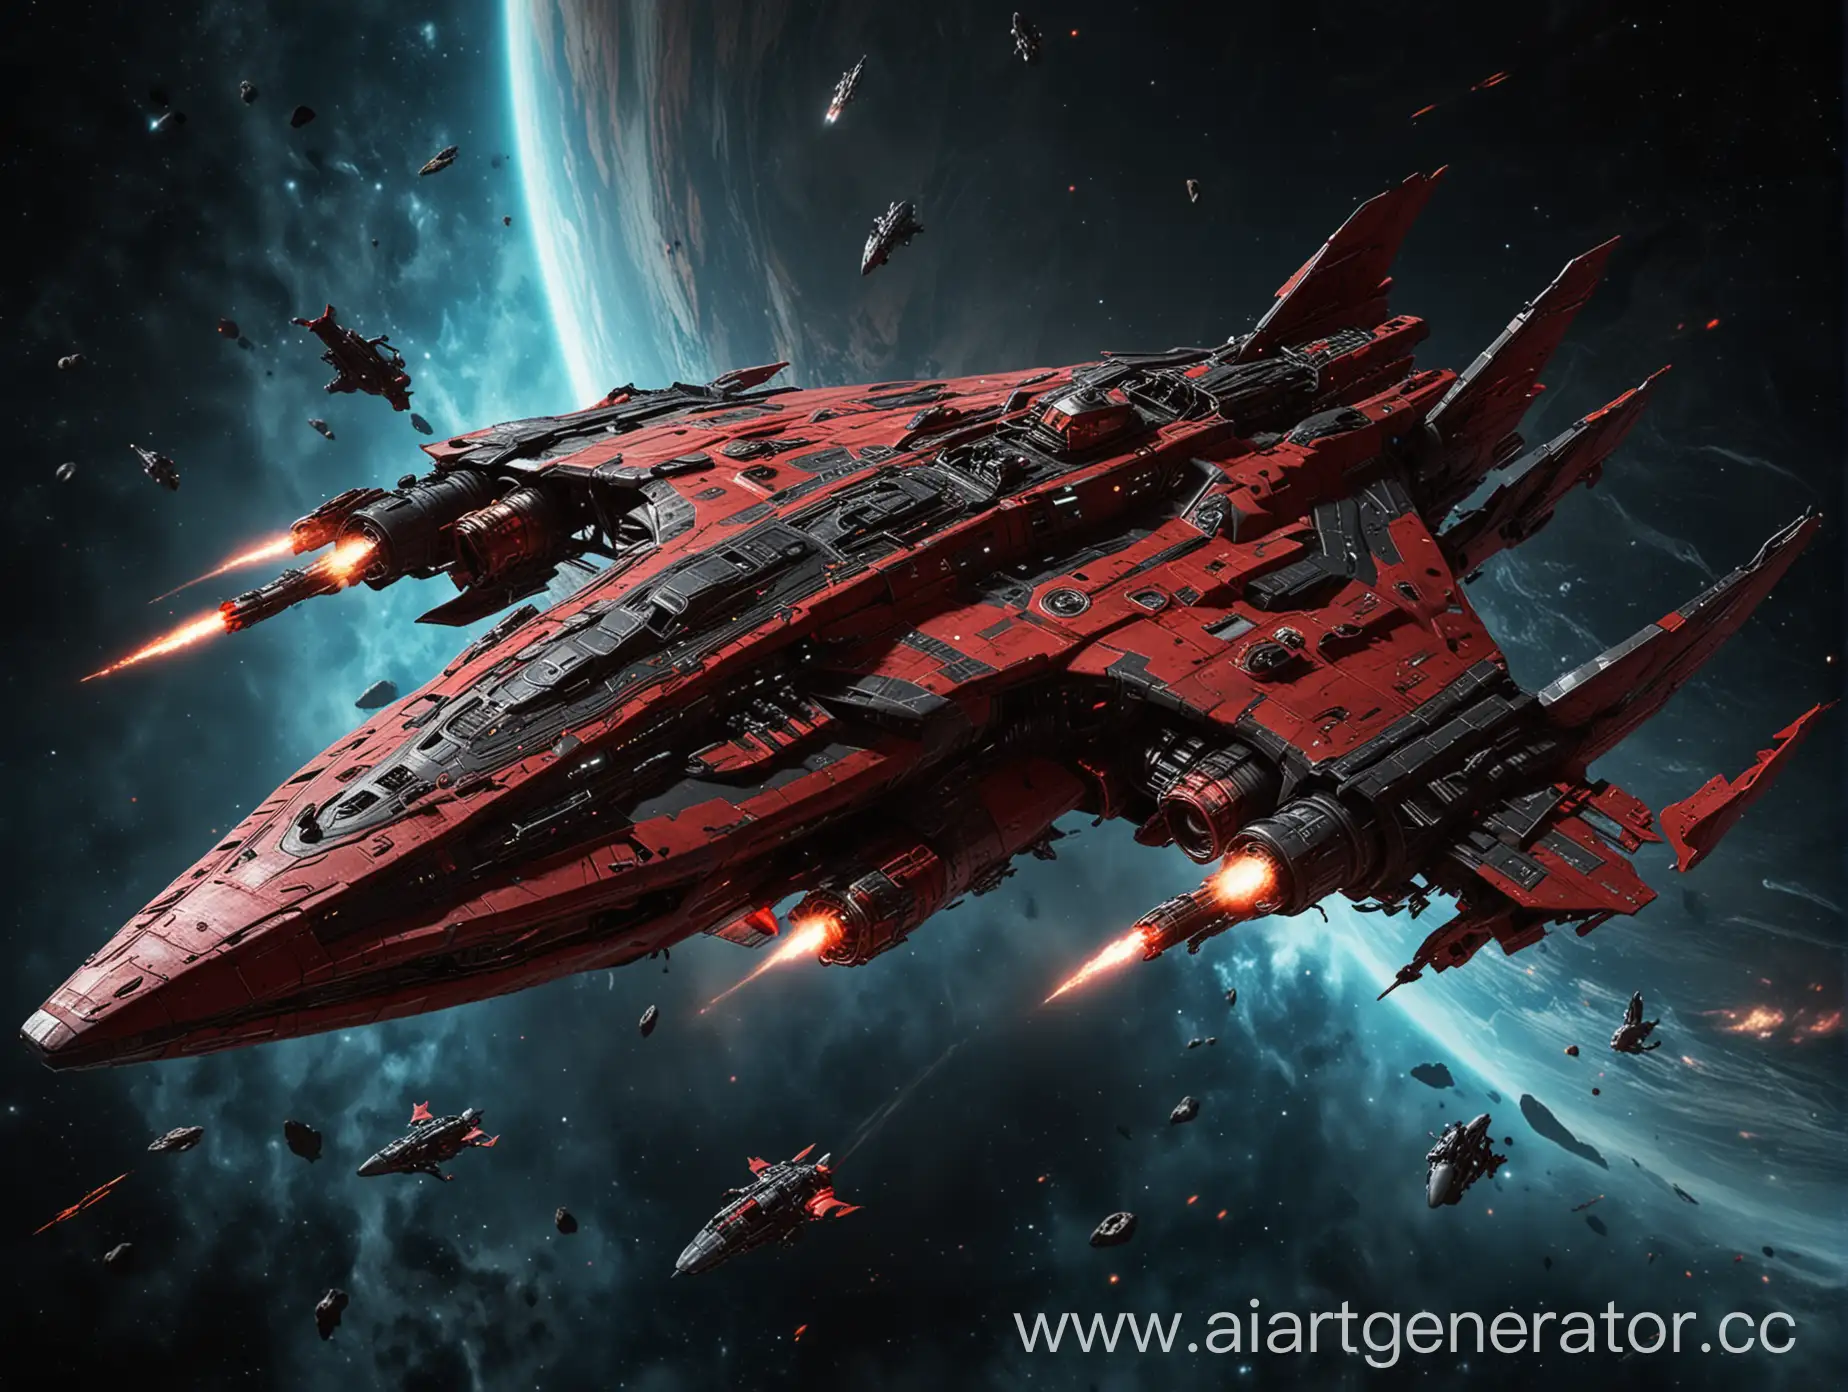 Menacing-Alien-Mothership-Drifting-in-Space-with-PlanetDestroying-Weapons